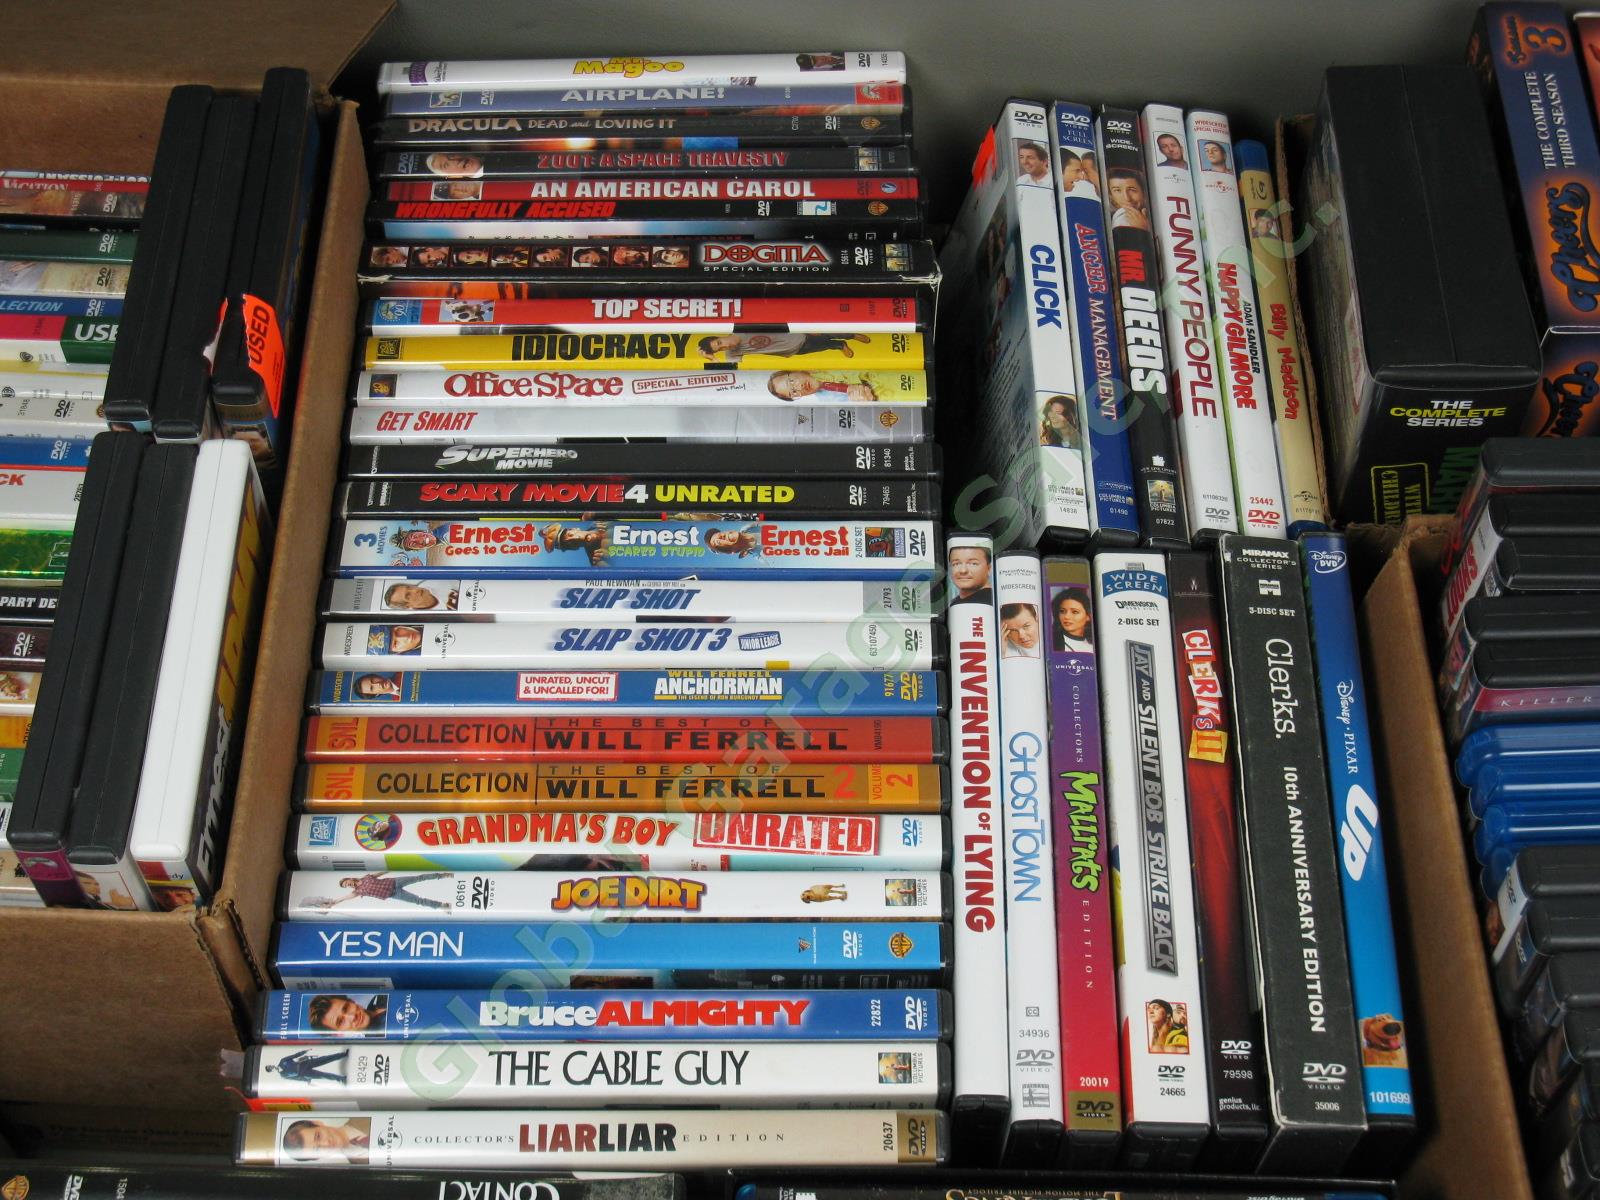 HUGE Mixed Assorted Blu-Ray DVD Collection Movies TV Series Seasons Box Sets +++ 1